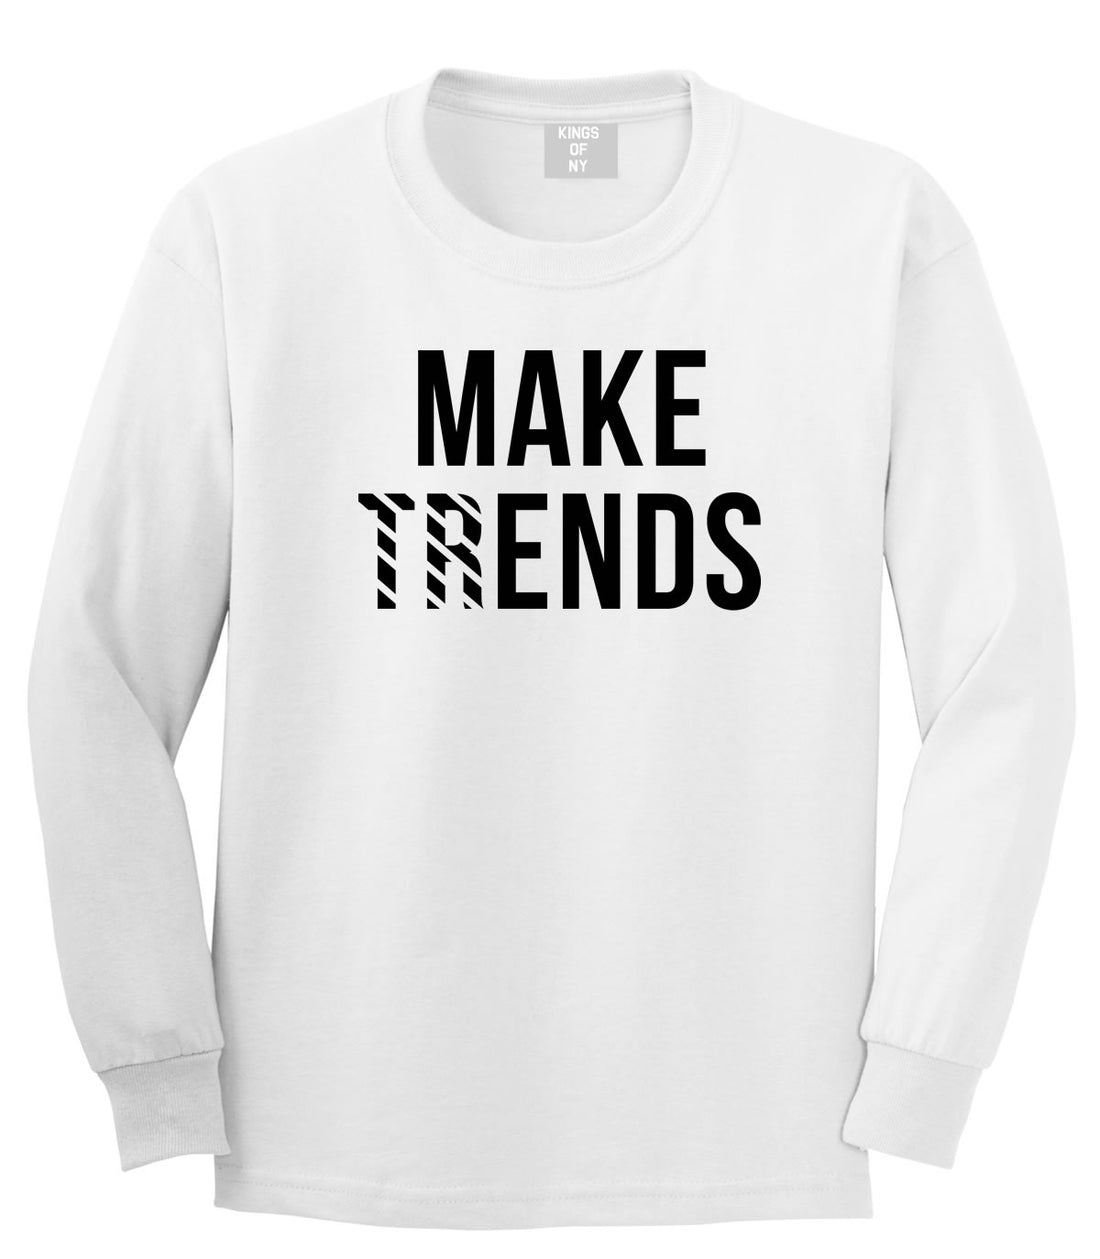 Make Trends Make Ends Boys Kids Long Sleeve T-Shirt in White by Kings Of NY